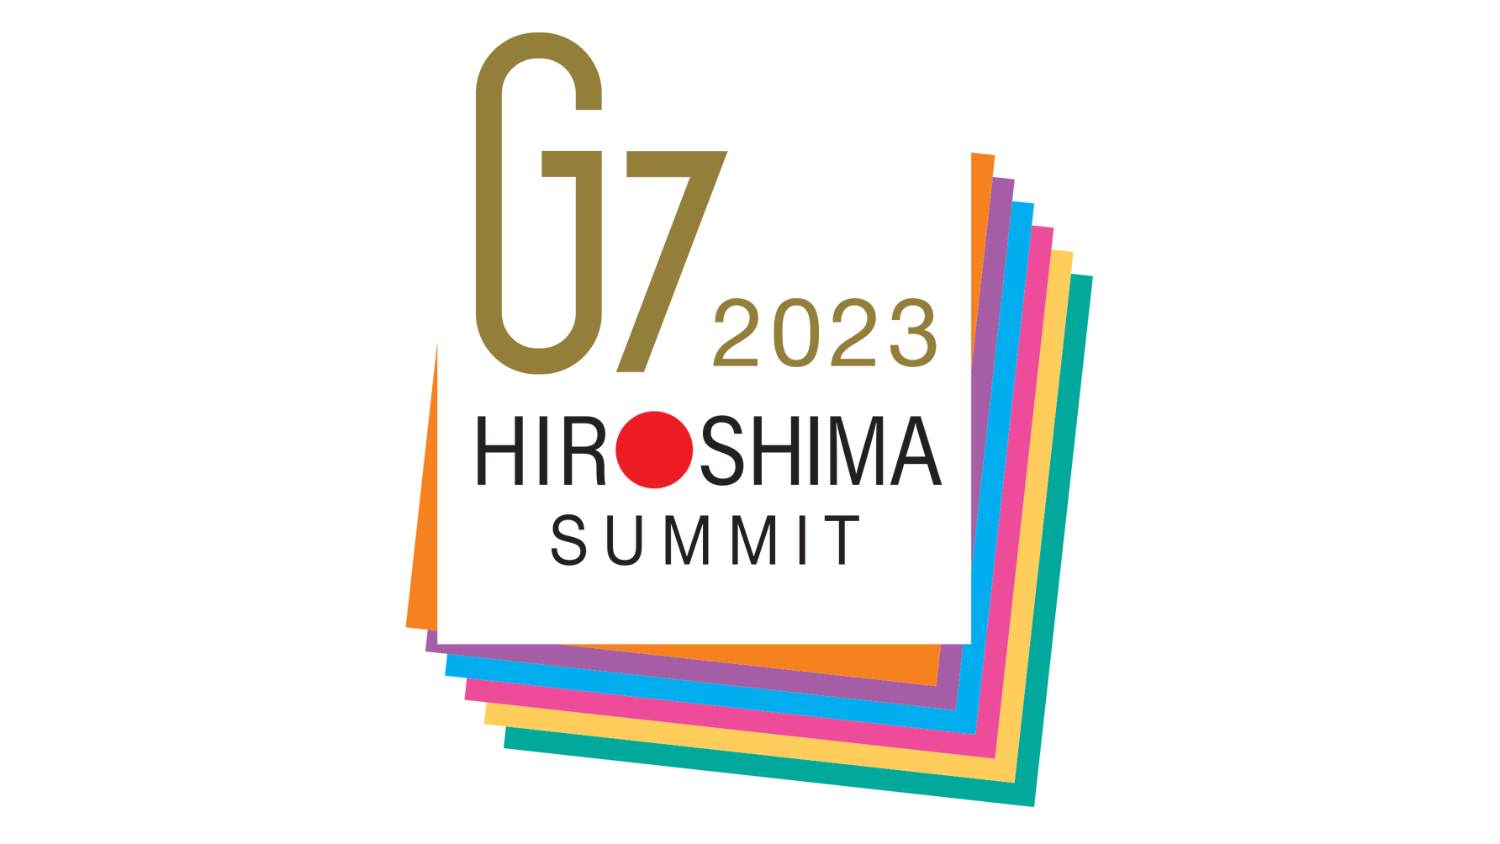 G7 2023 Japan: Know About Schedule, Agenda, Key Issues, Participants, India’s Role and More